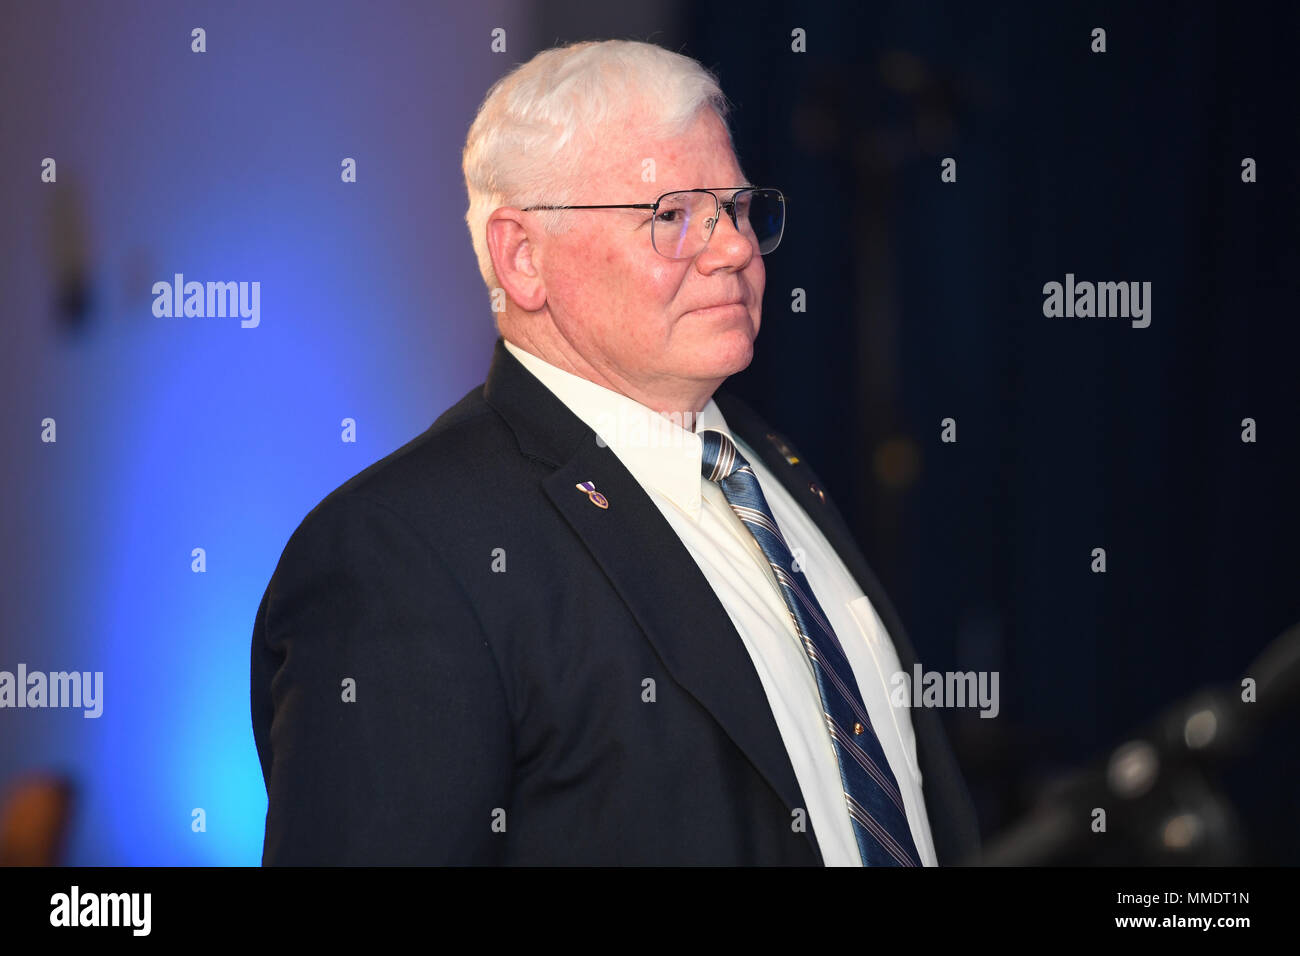 Retired U.S. Army Capt. Gary M. Rose attends the Medal of Honor reception at the Marriott Fairview Park in Falls Church, Virginia, Oct. 22, 2017. Rose will be awarded the Medal of Honor Oct. 23, 2017, for actions during Operation Tailwind in Southeastern Laos during the Vietnam War, Sept. 11-14, 1970. Then-Sgt. Rose was assigned to the 5th Special Forces Group (Airborne) at the time of the action.  (U.S. Army photo by Spc. Tammy Nooner) Stock Photo